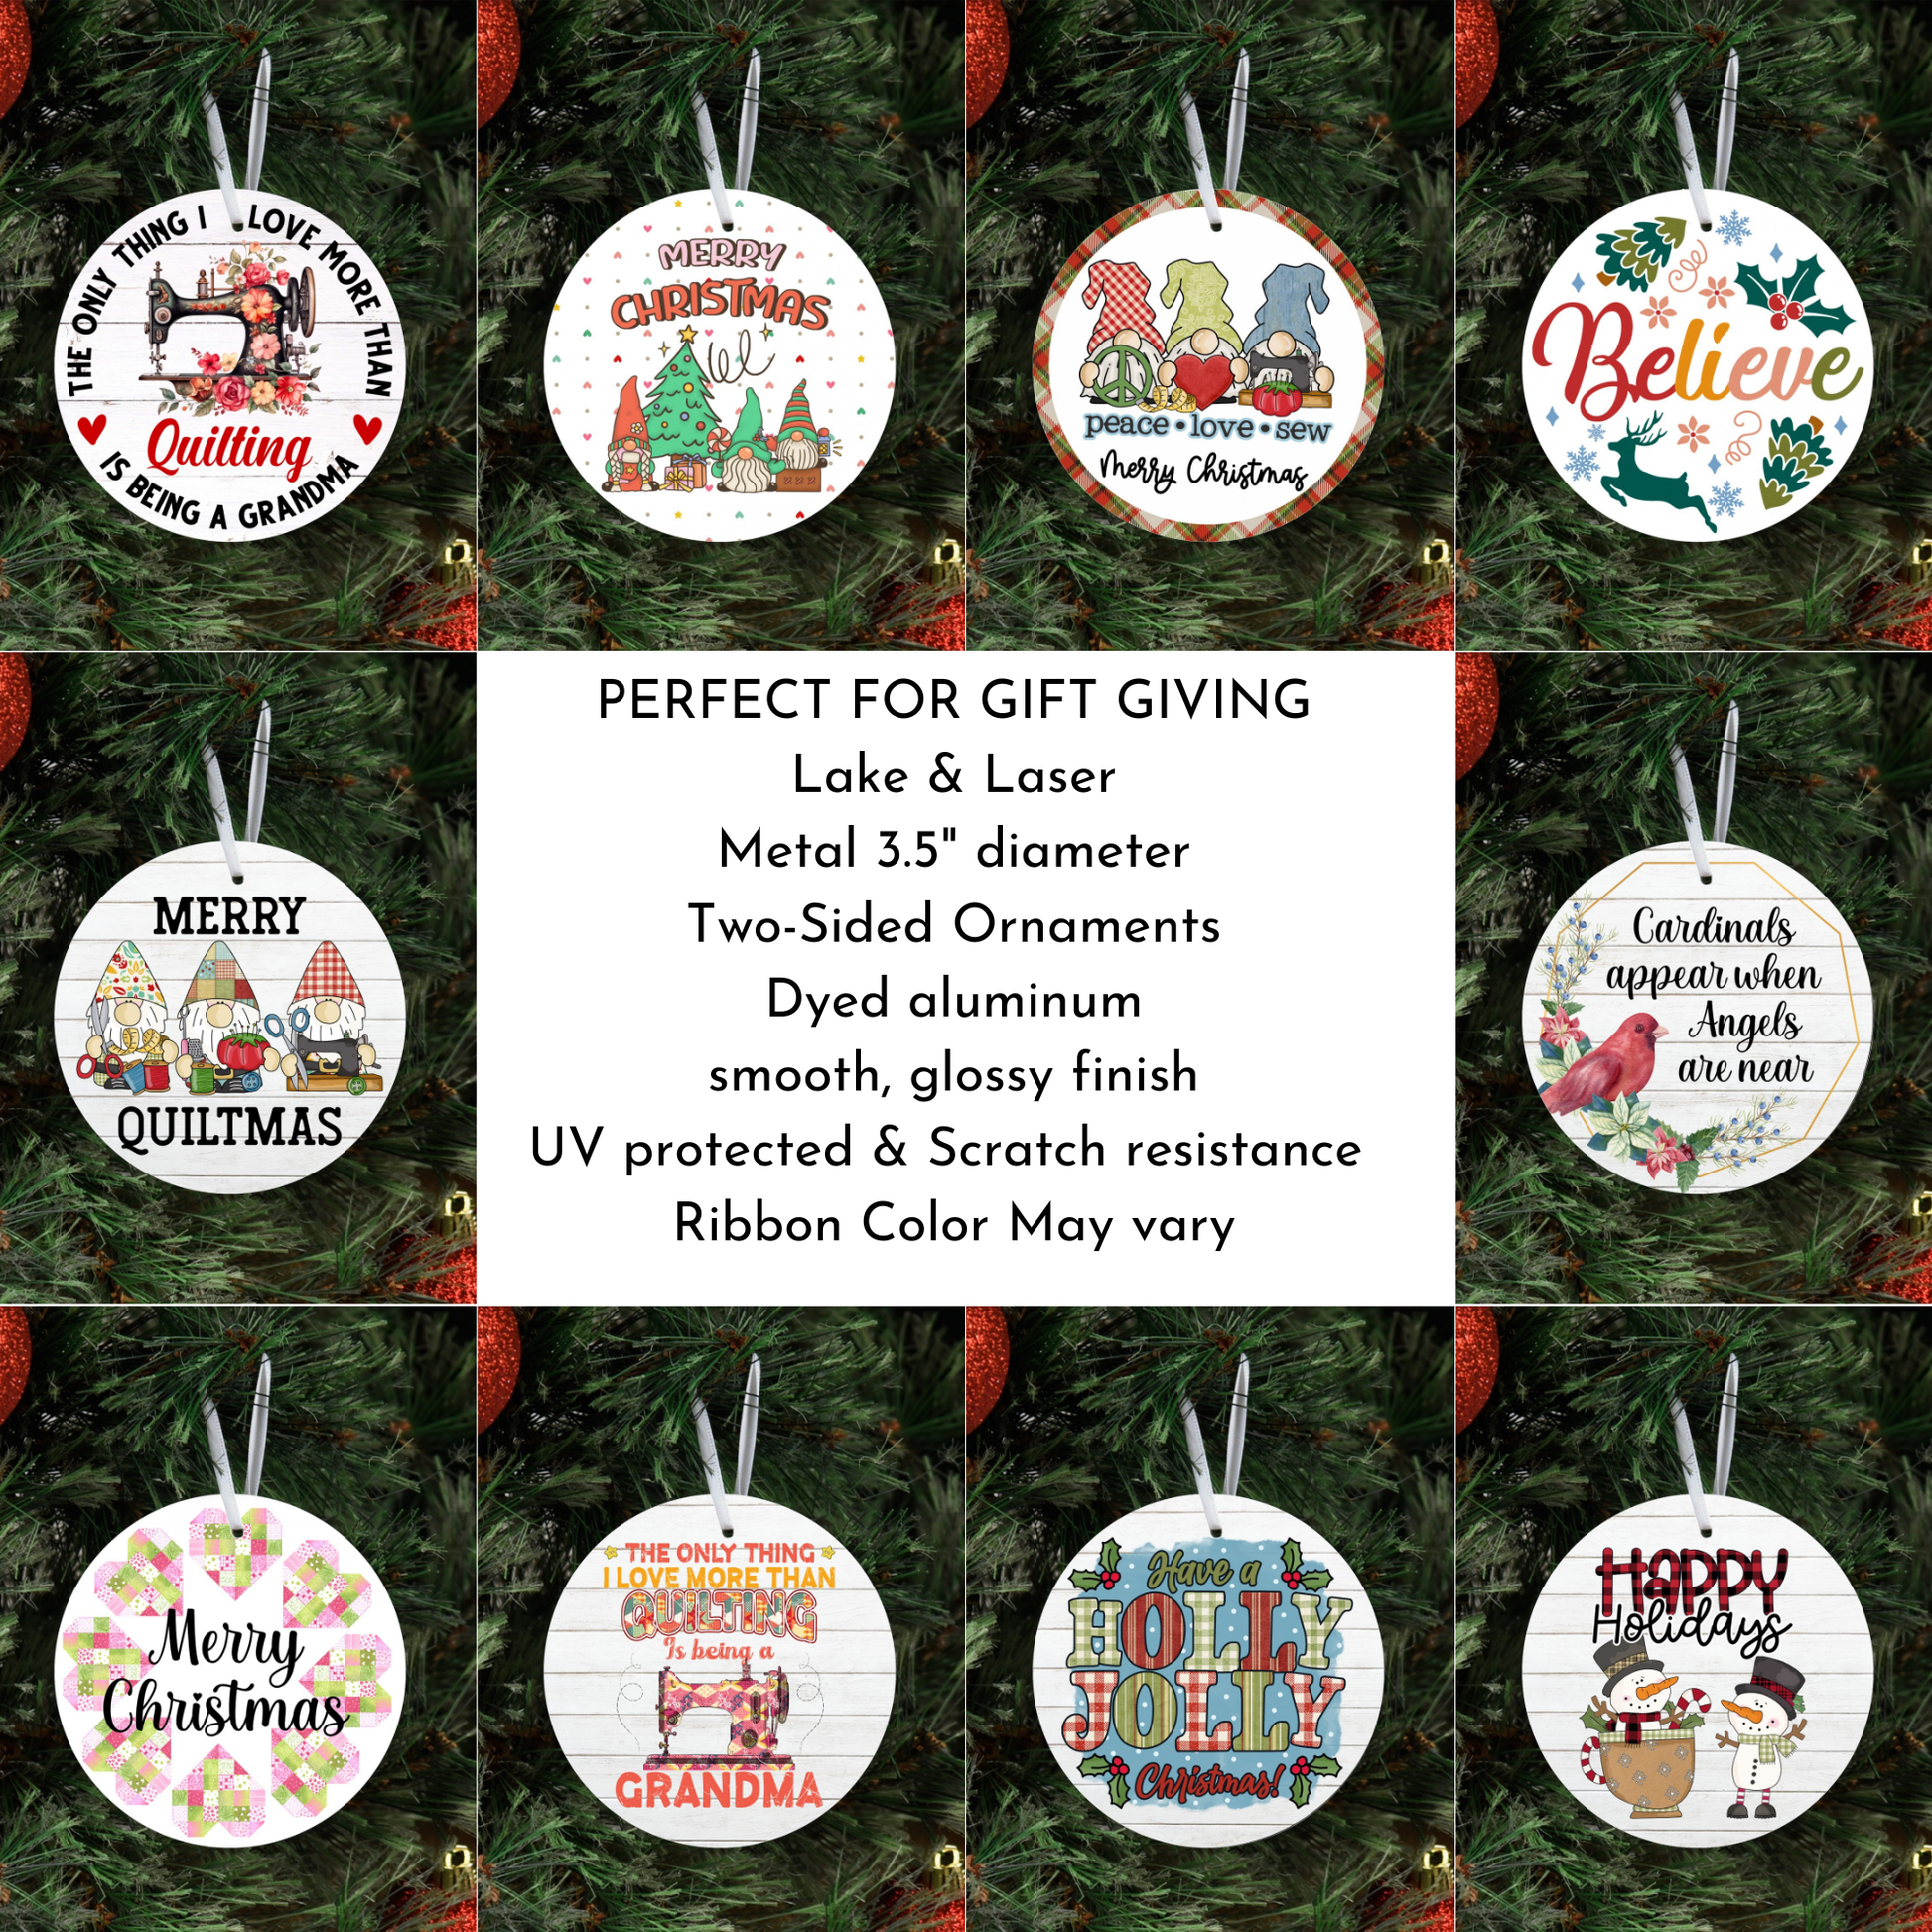 Lake & Laser Christmas Ornament TREE WITH GNOMES, Christmas Ornament by Lake & Laser